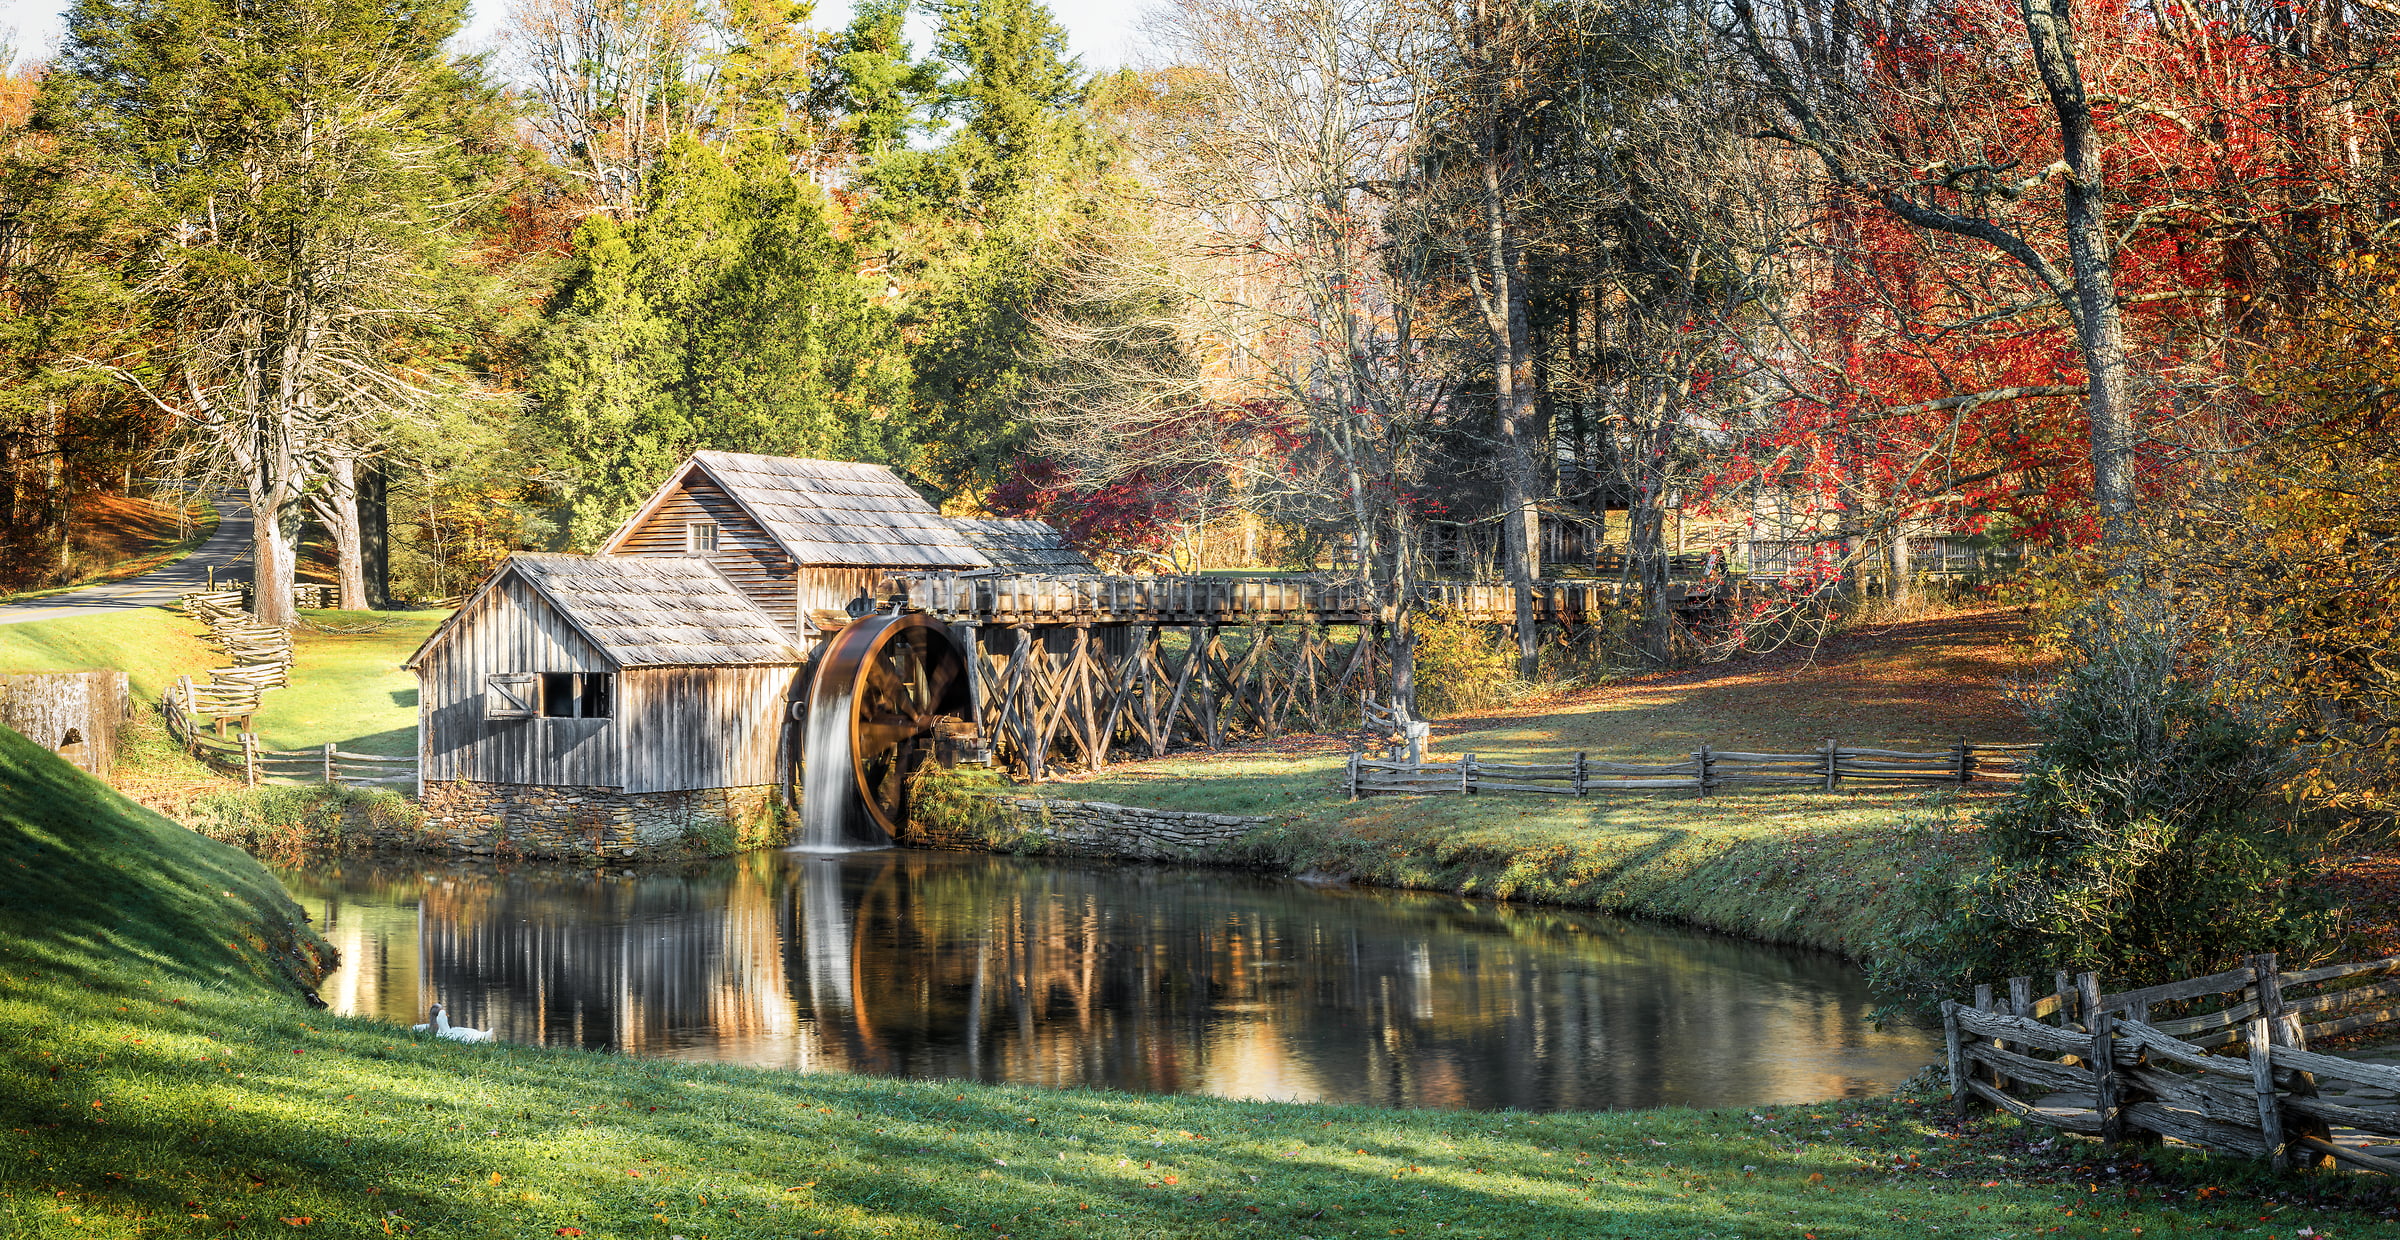 138 megapixels! A very high resolution, large-format VAST photo of a quaint old mill and a waterwheel; fine art photograph created by Jim Tarpo at Milepost 176 of the Blue Ridge Pkwy, Virginia.